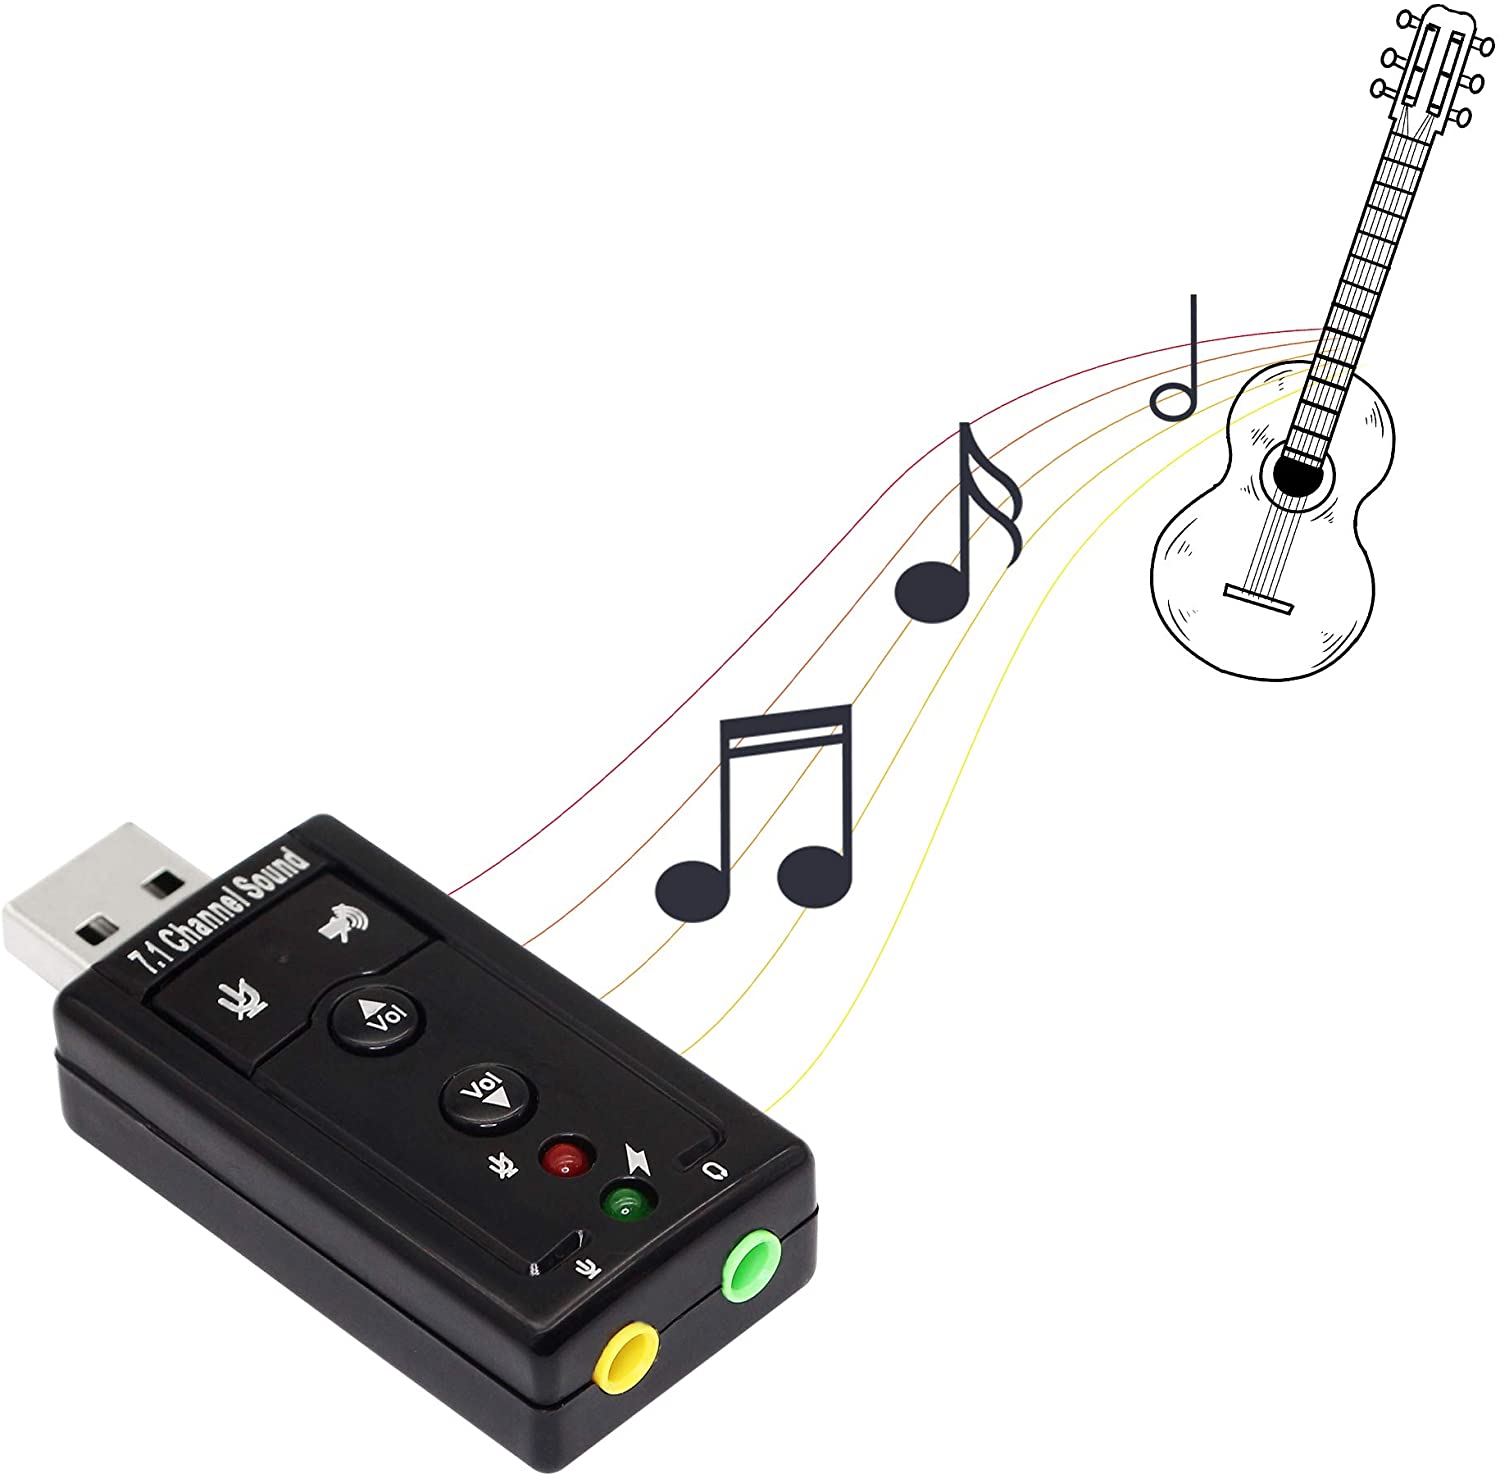 7.1 USB Stereo Audio Adapter External Sound Card - Sound card - stereo - USB 2.0 - ICUSBAUDIO7,Black - image 2 of 6